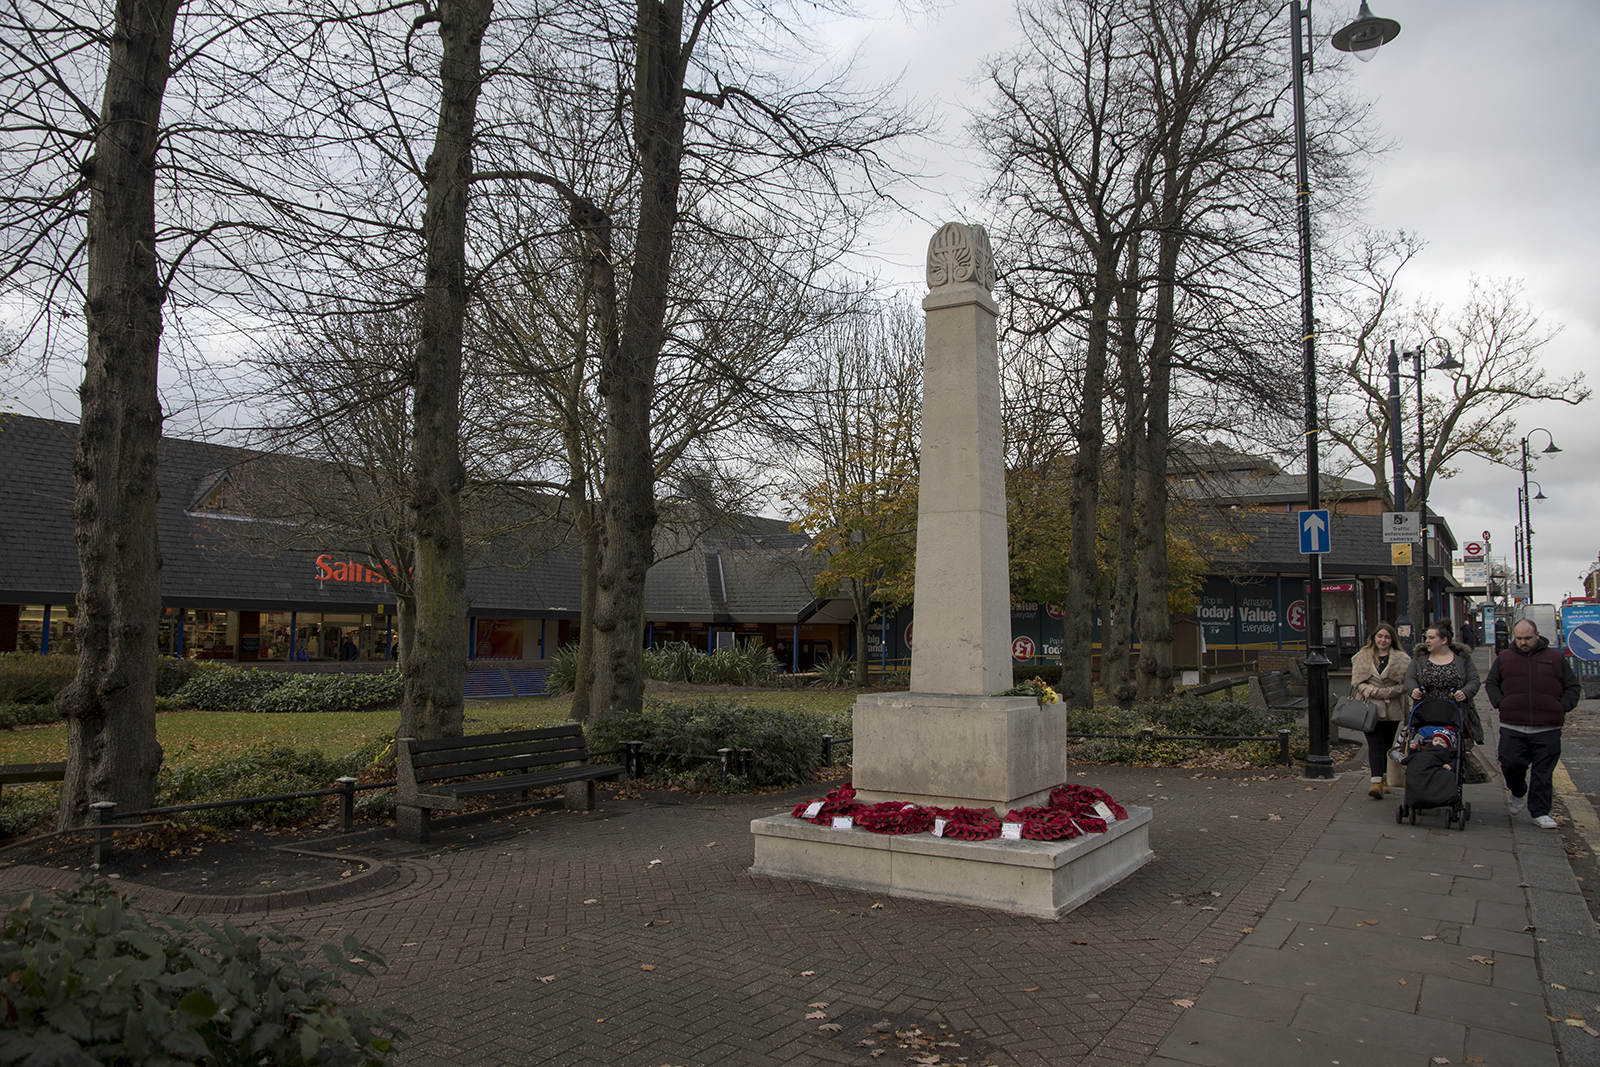 20161124_Bromley_Gipsey-Hill_Landscape_Winter_Memorial-outside-Sainsburys